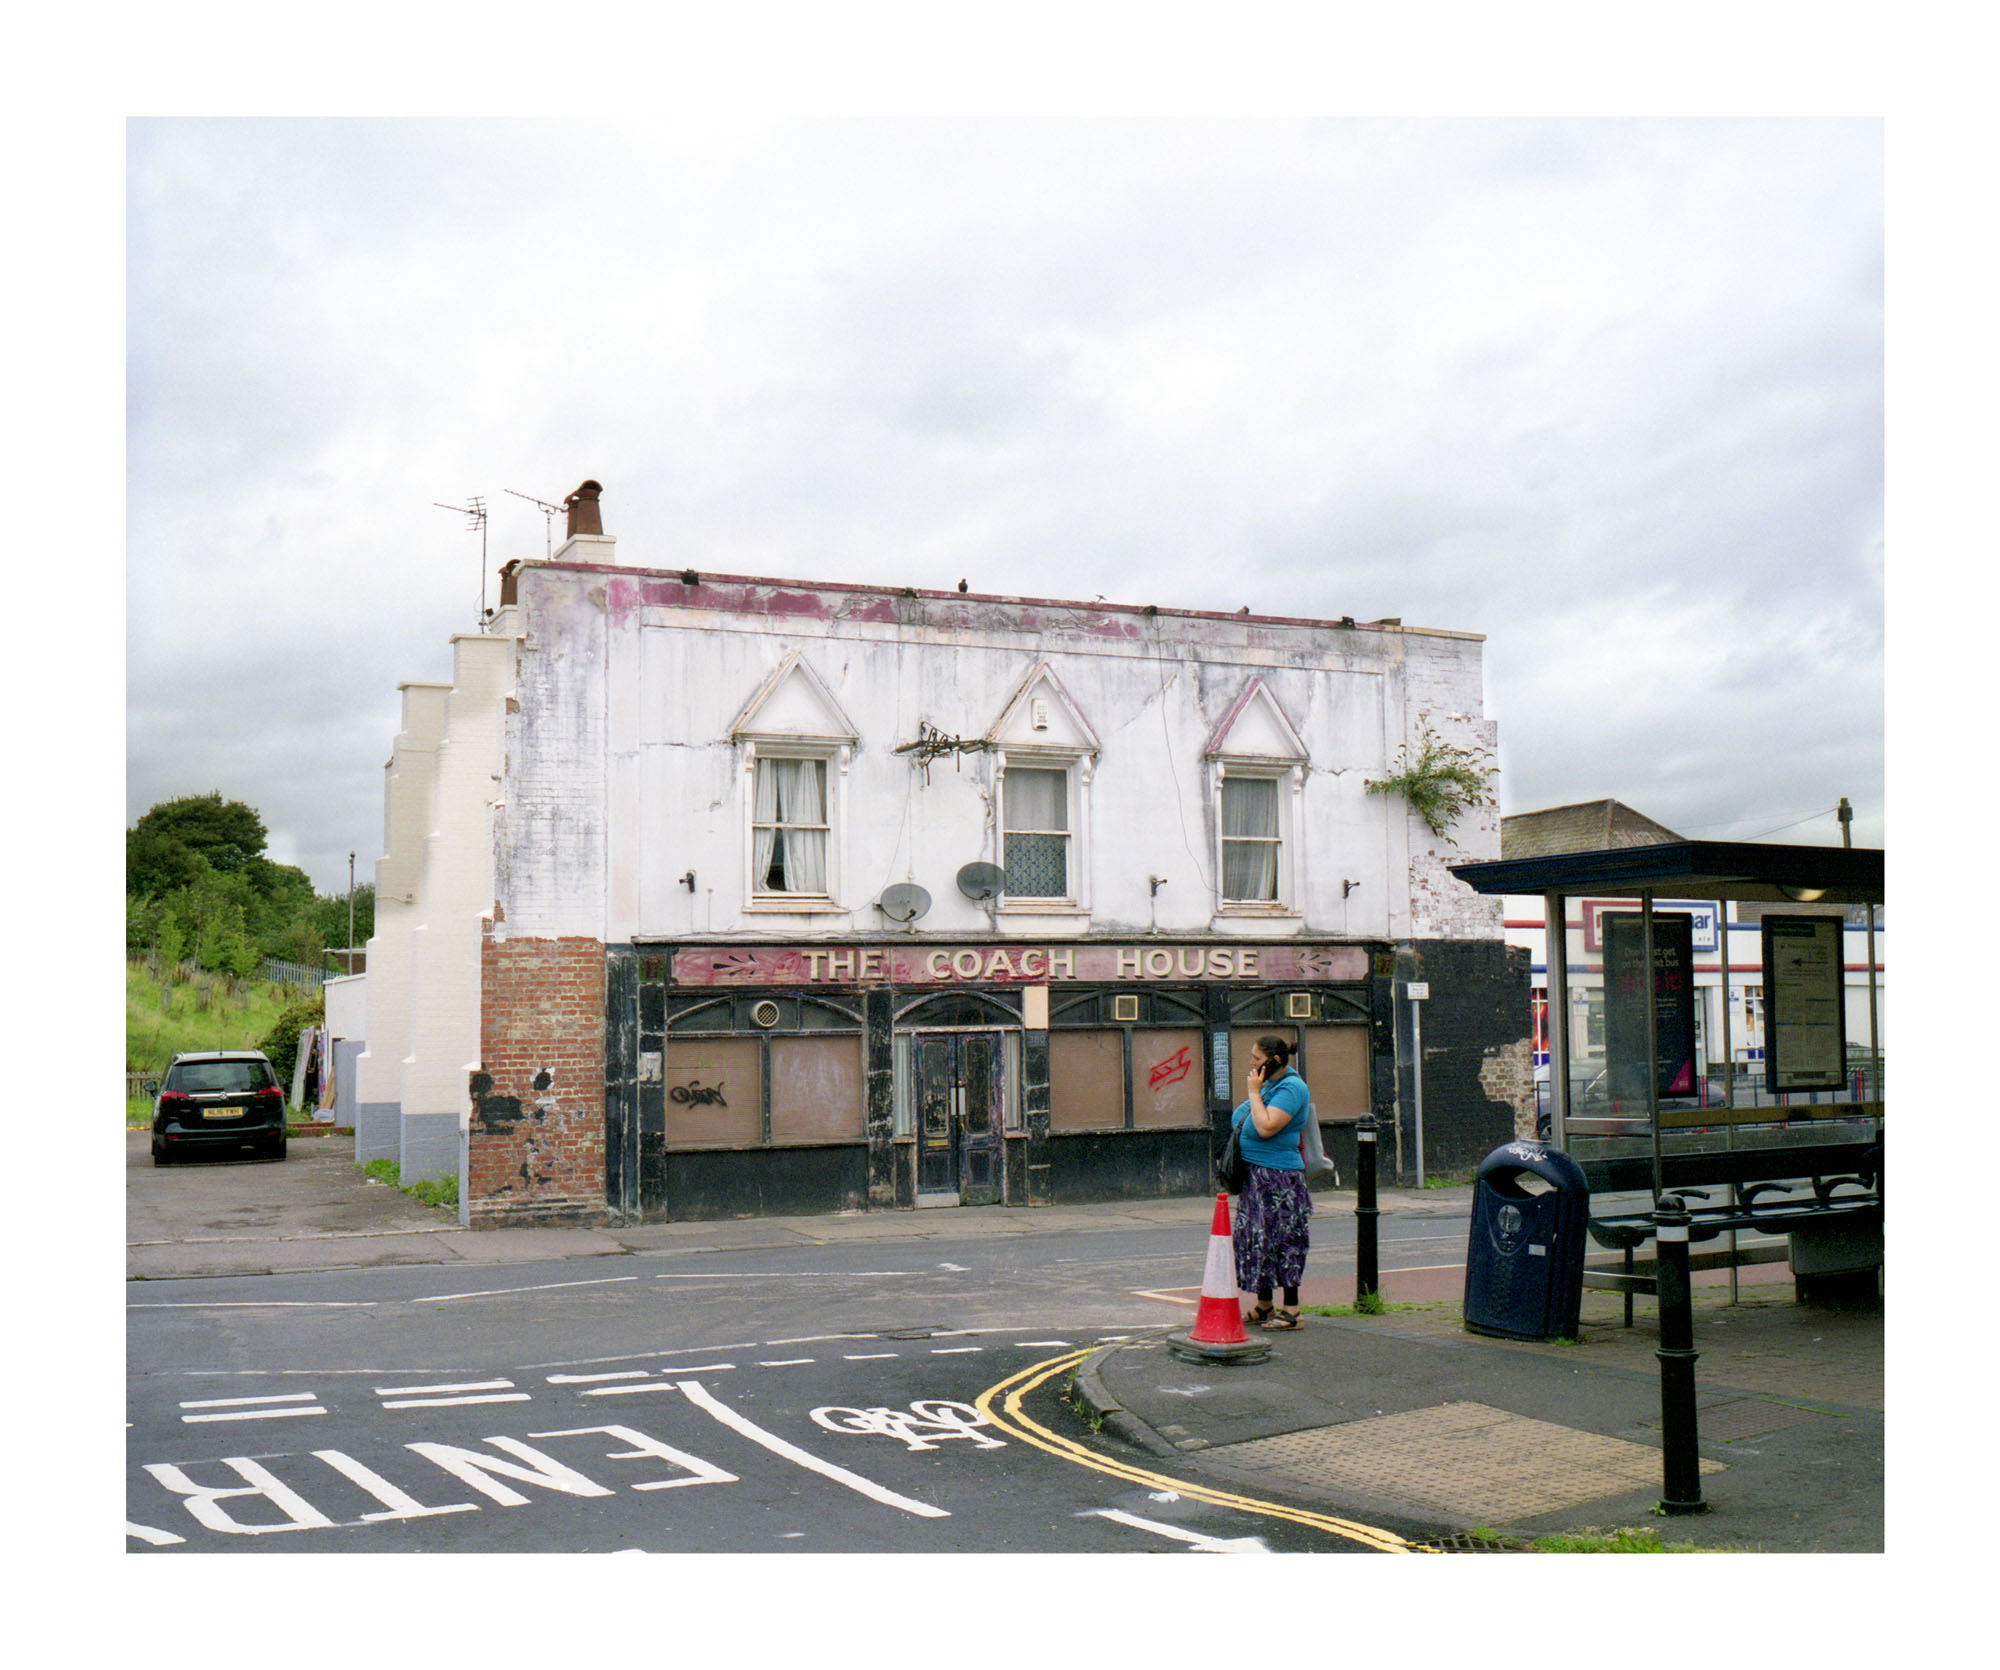 An old boarded up pub called The Coach House viewed across a road. In the foreground a woman stands next to a traffic cone talking on her phone.